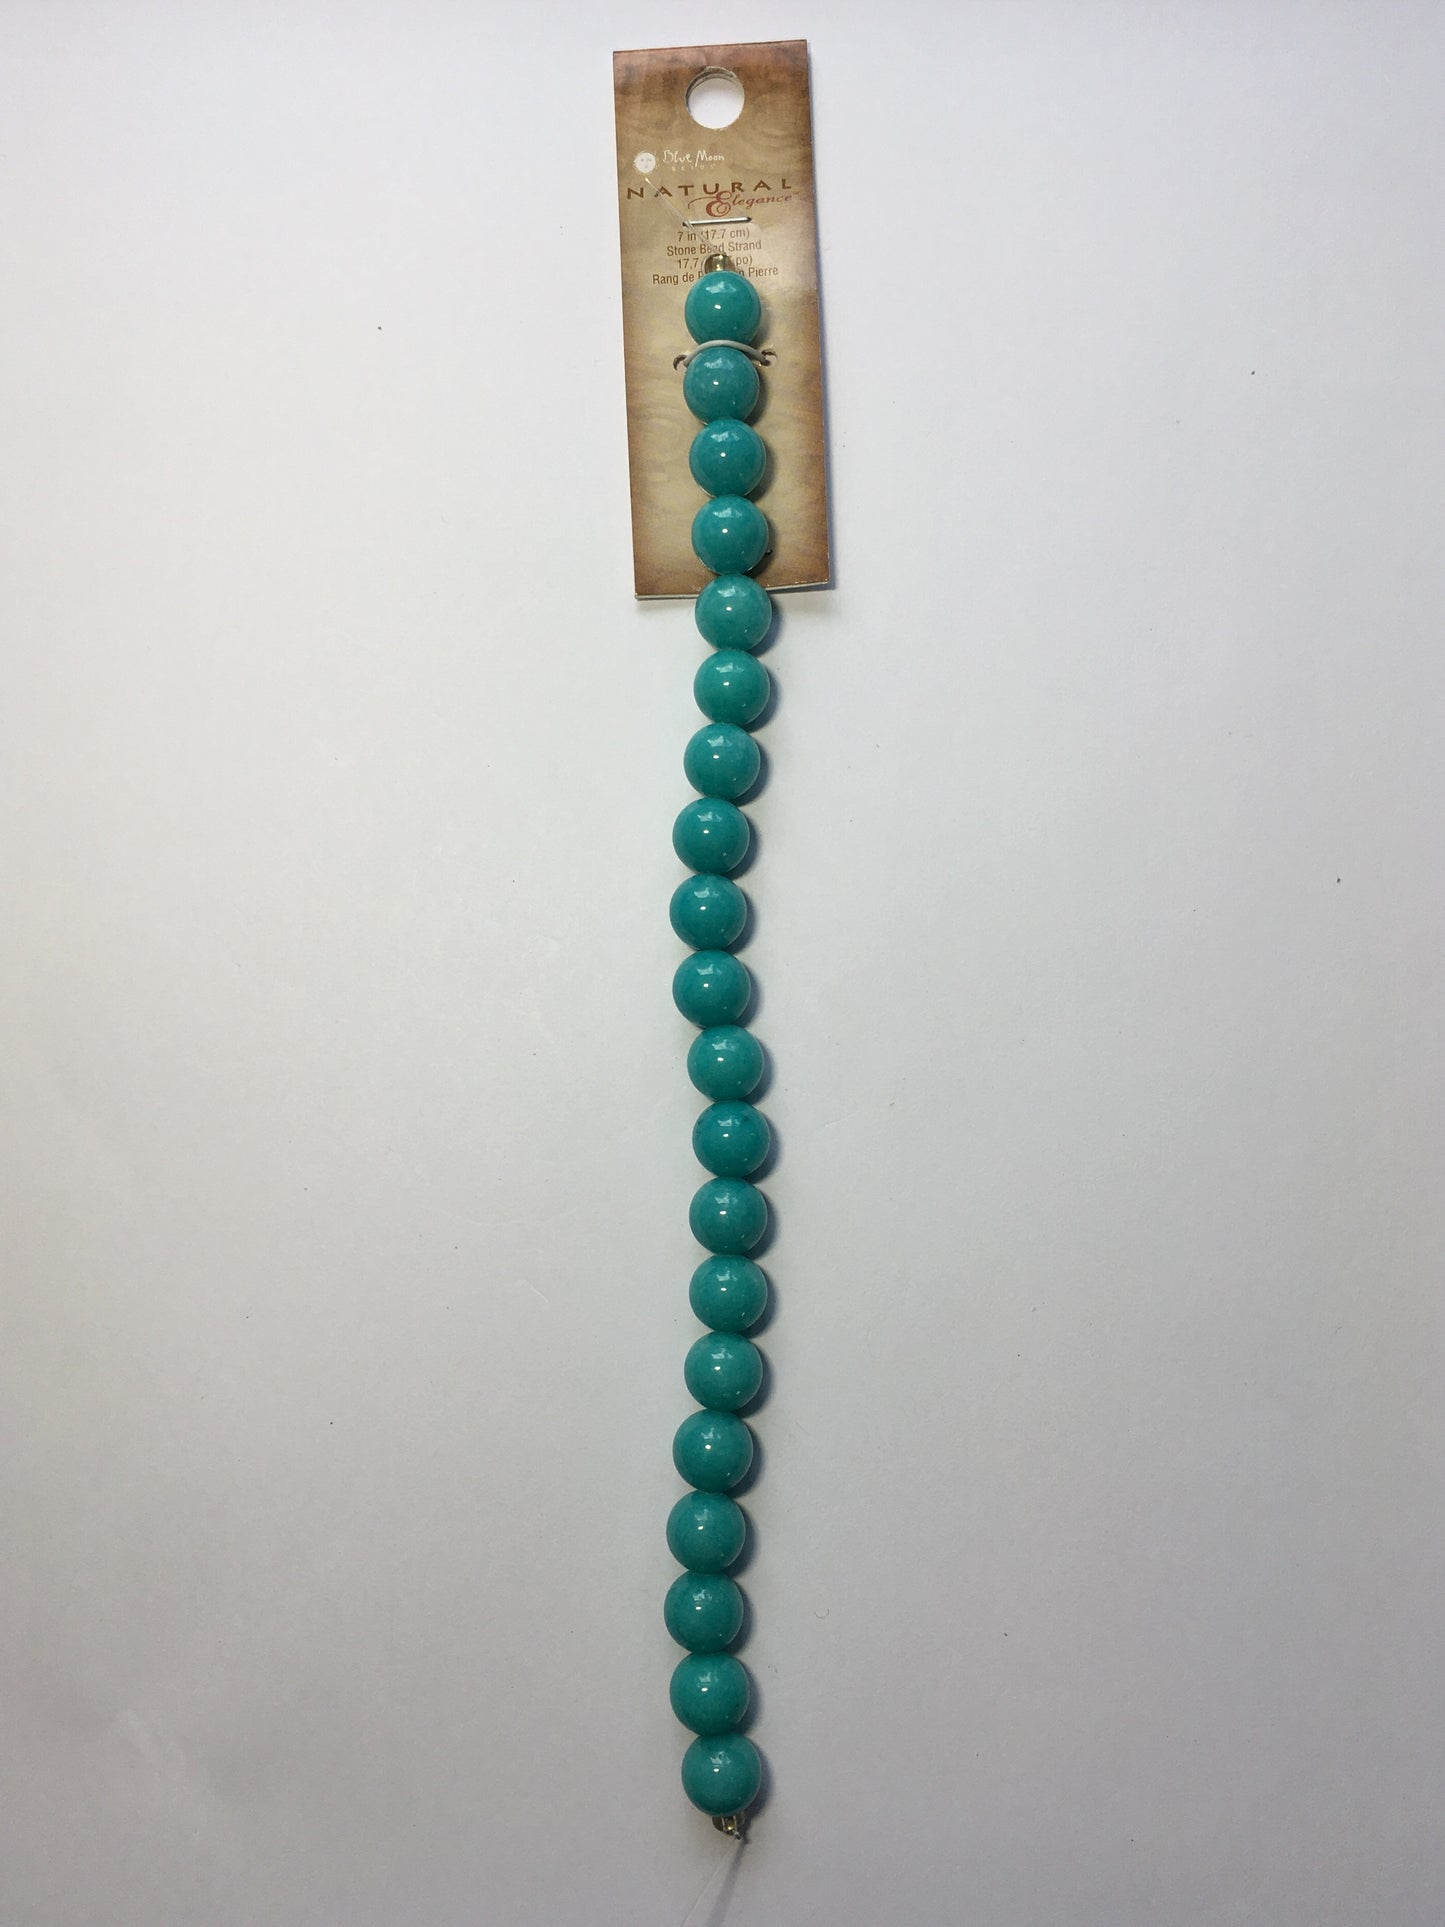 Blue Moon Natural Elegance Round Turquoise Stone Beads, 10 mm - 20 Beads